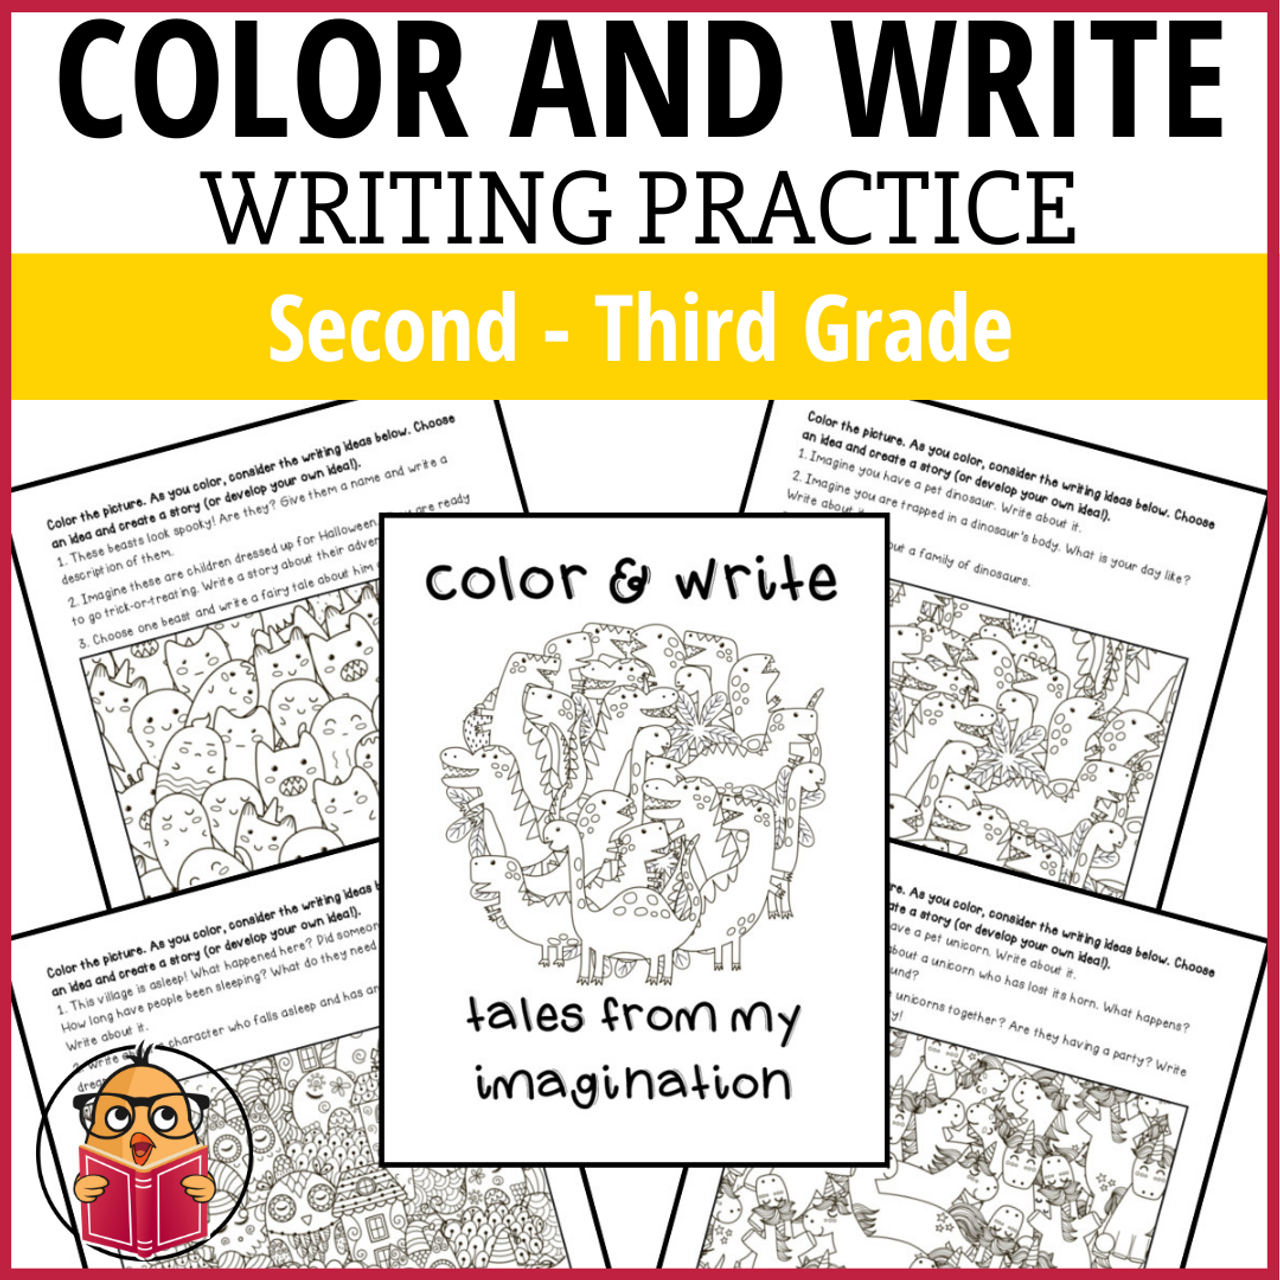 Writing Practice - Imagination Themed Writing Prompts & Coloring